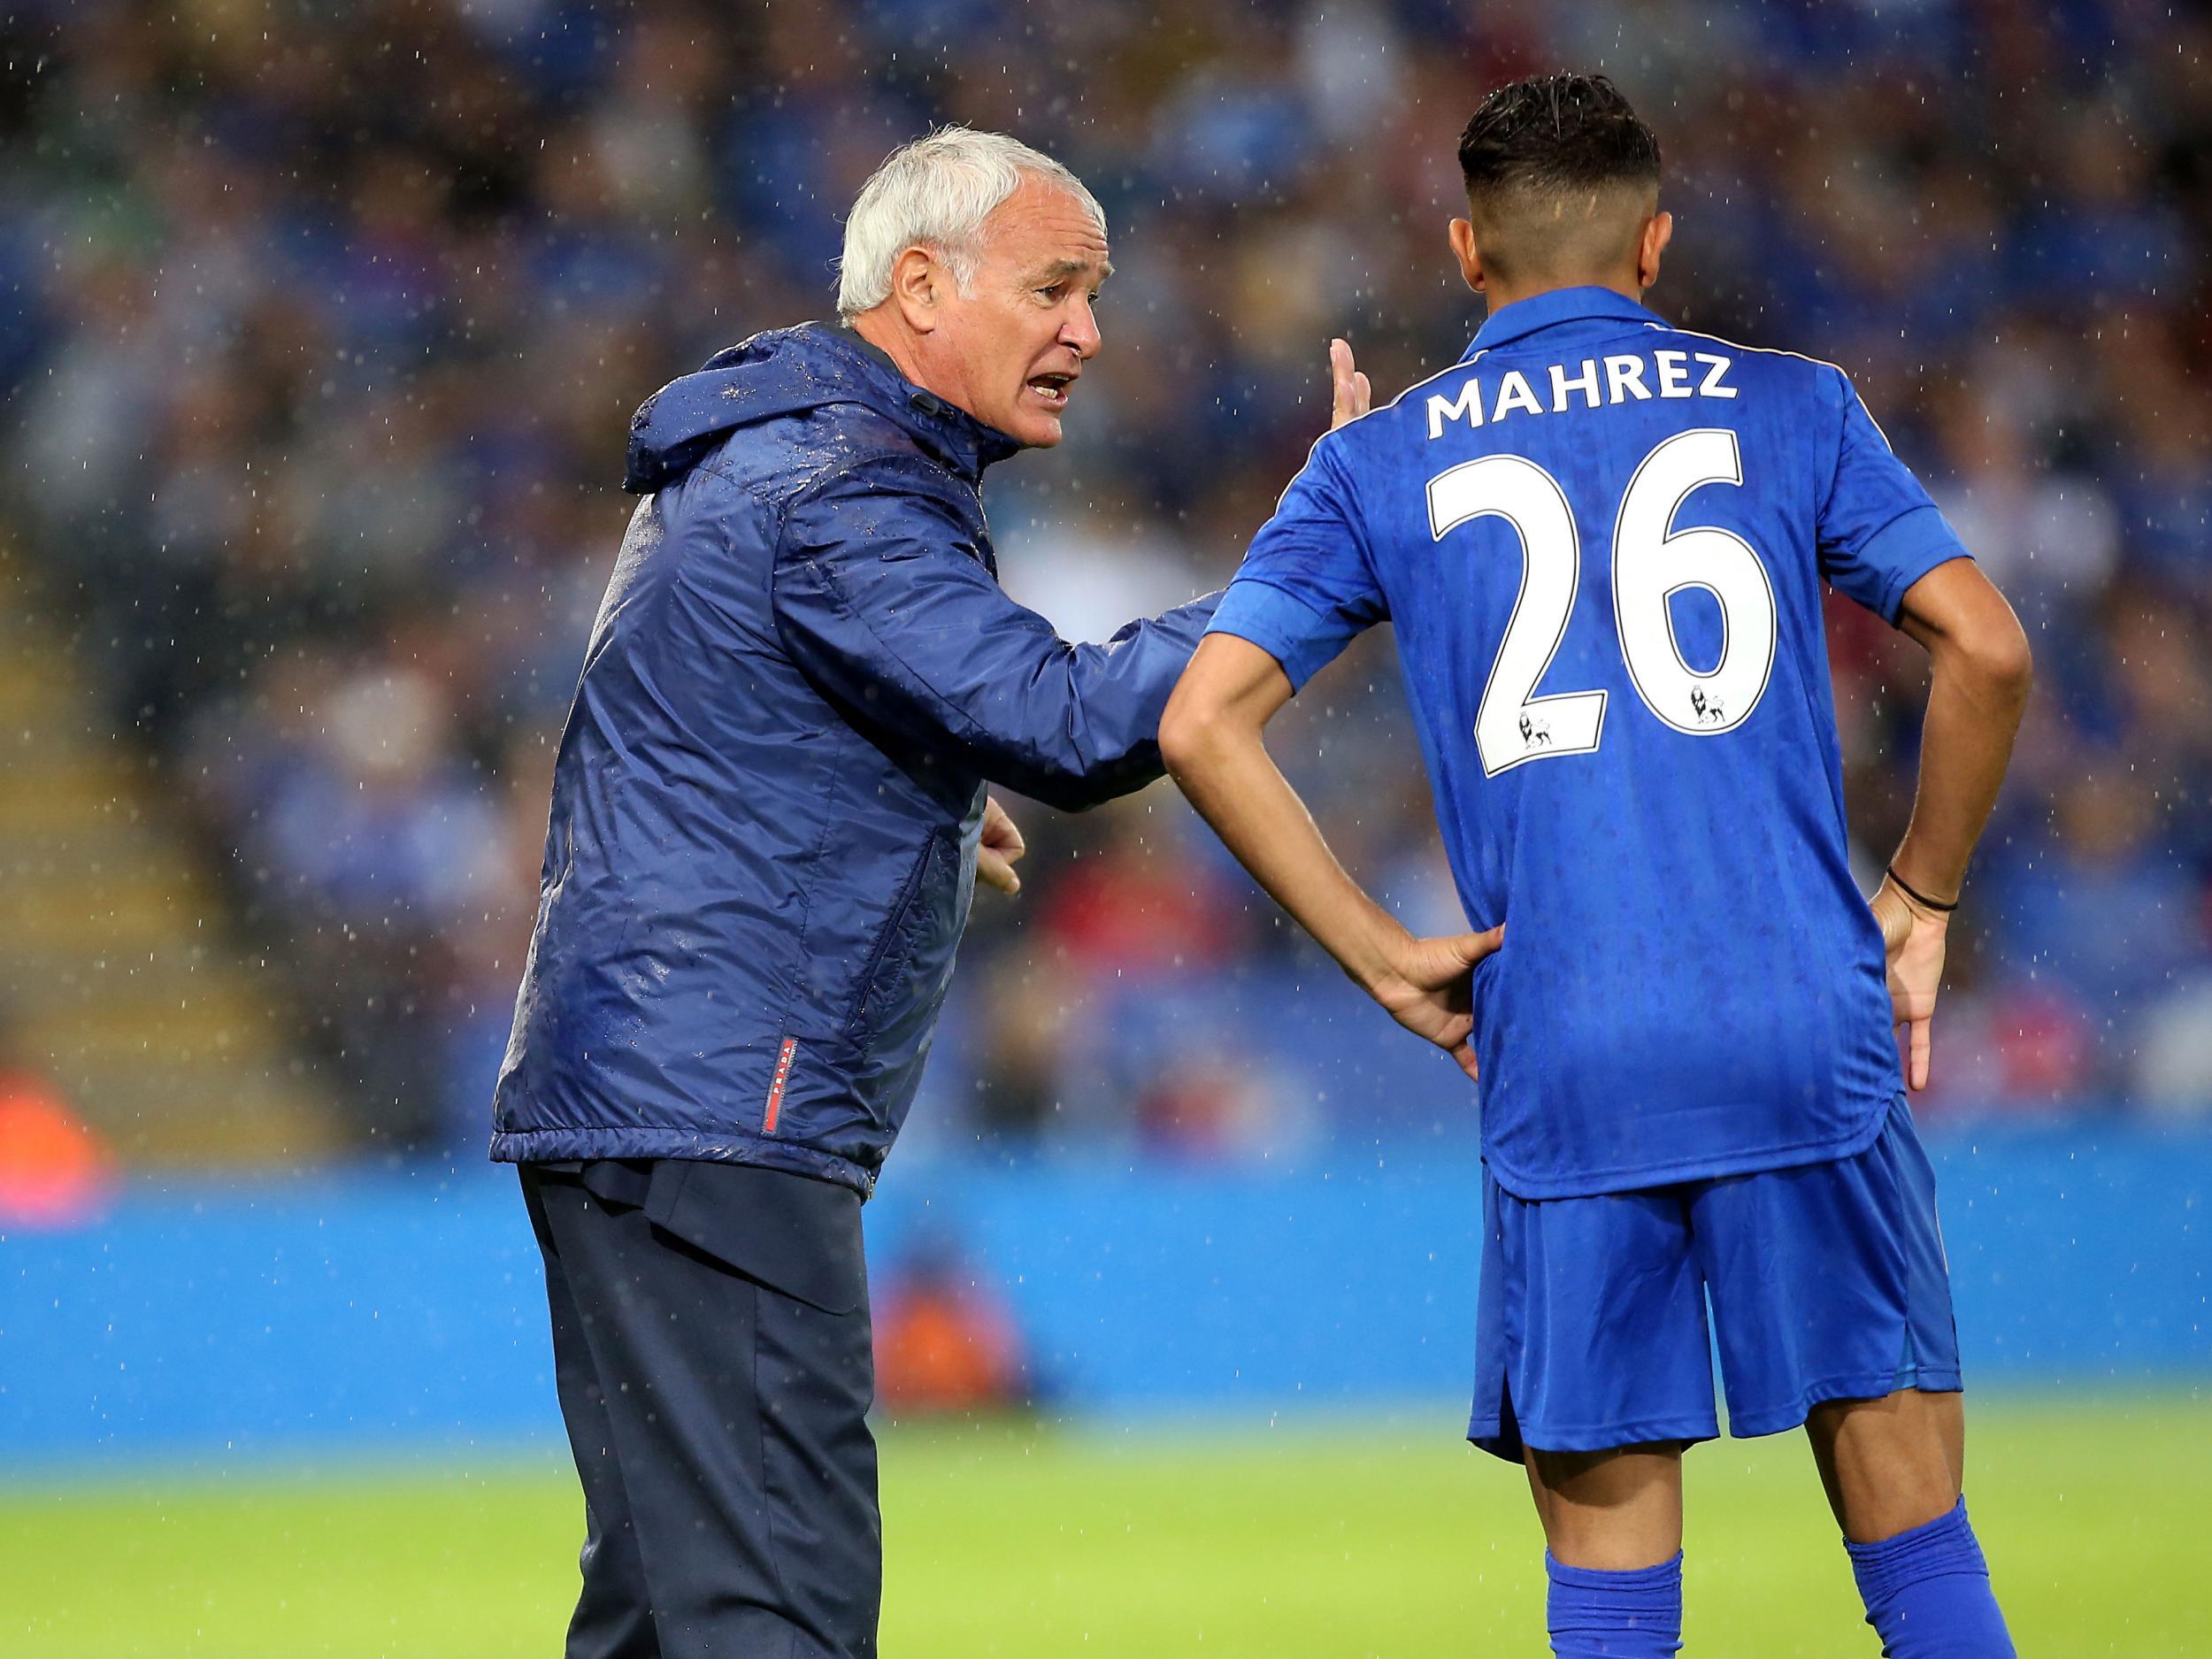 Ranieri dropped Mahrez after Leicester's 2-2 draw with Stoke at the Britannia Stadium